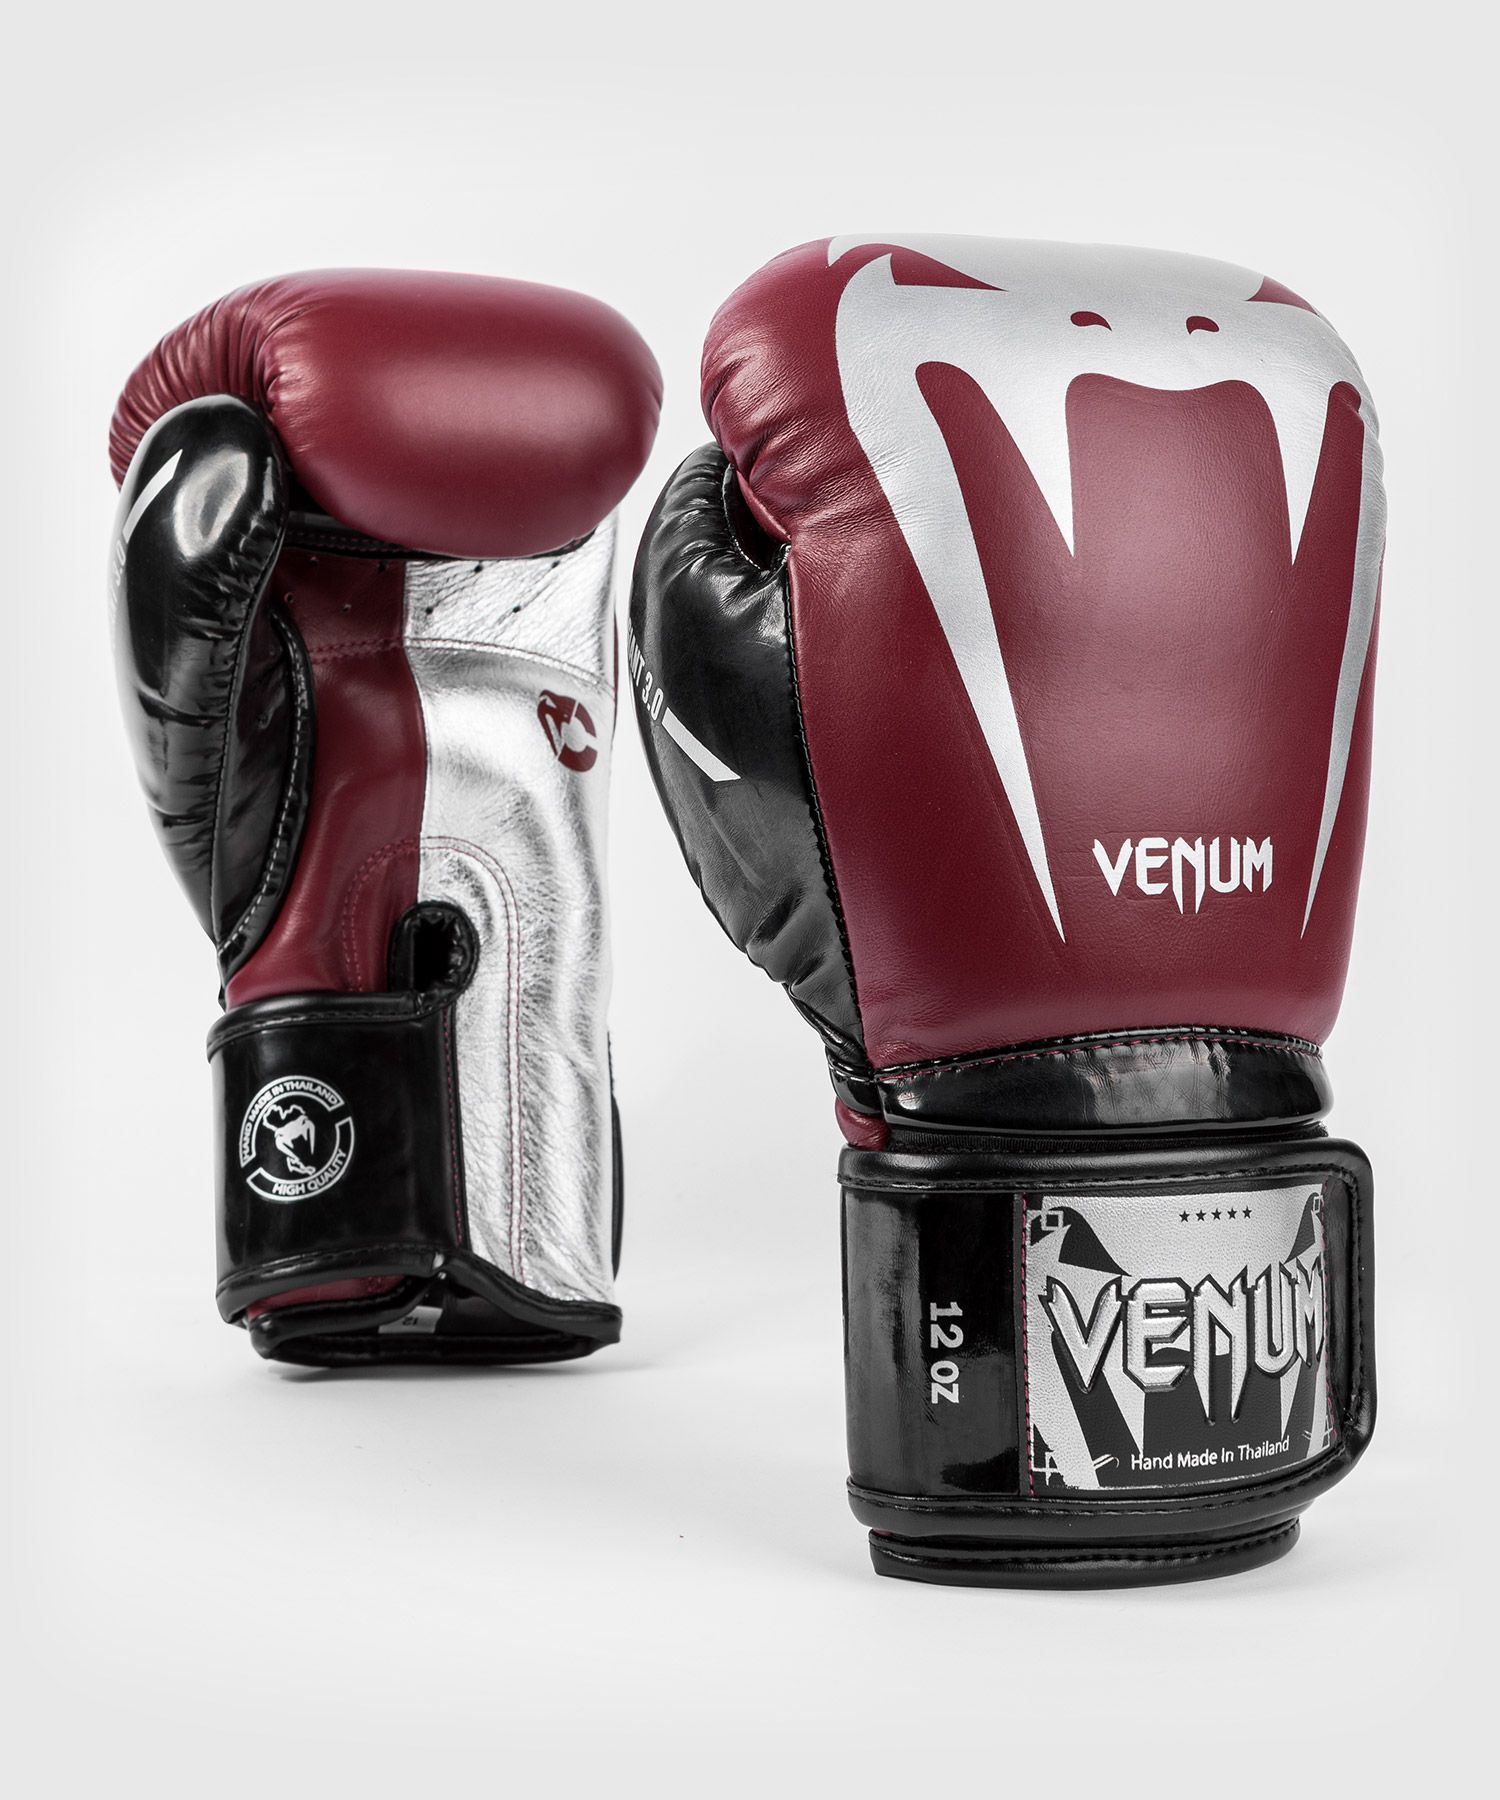 Venum Giant 3.0 Boxing Gloves Limited Edition - Burgundy